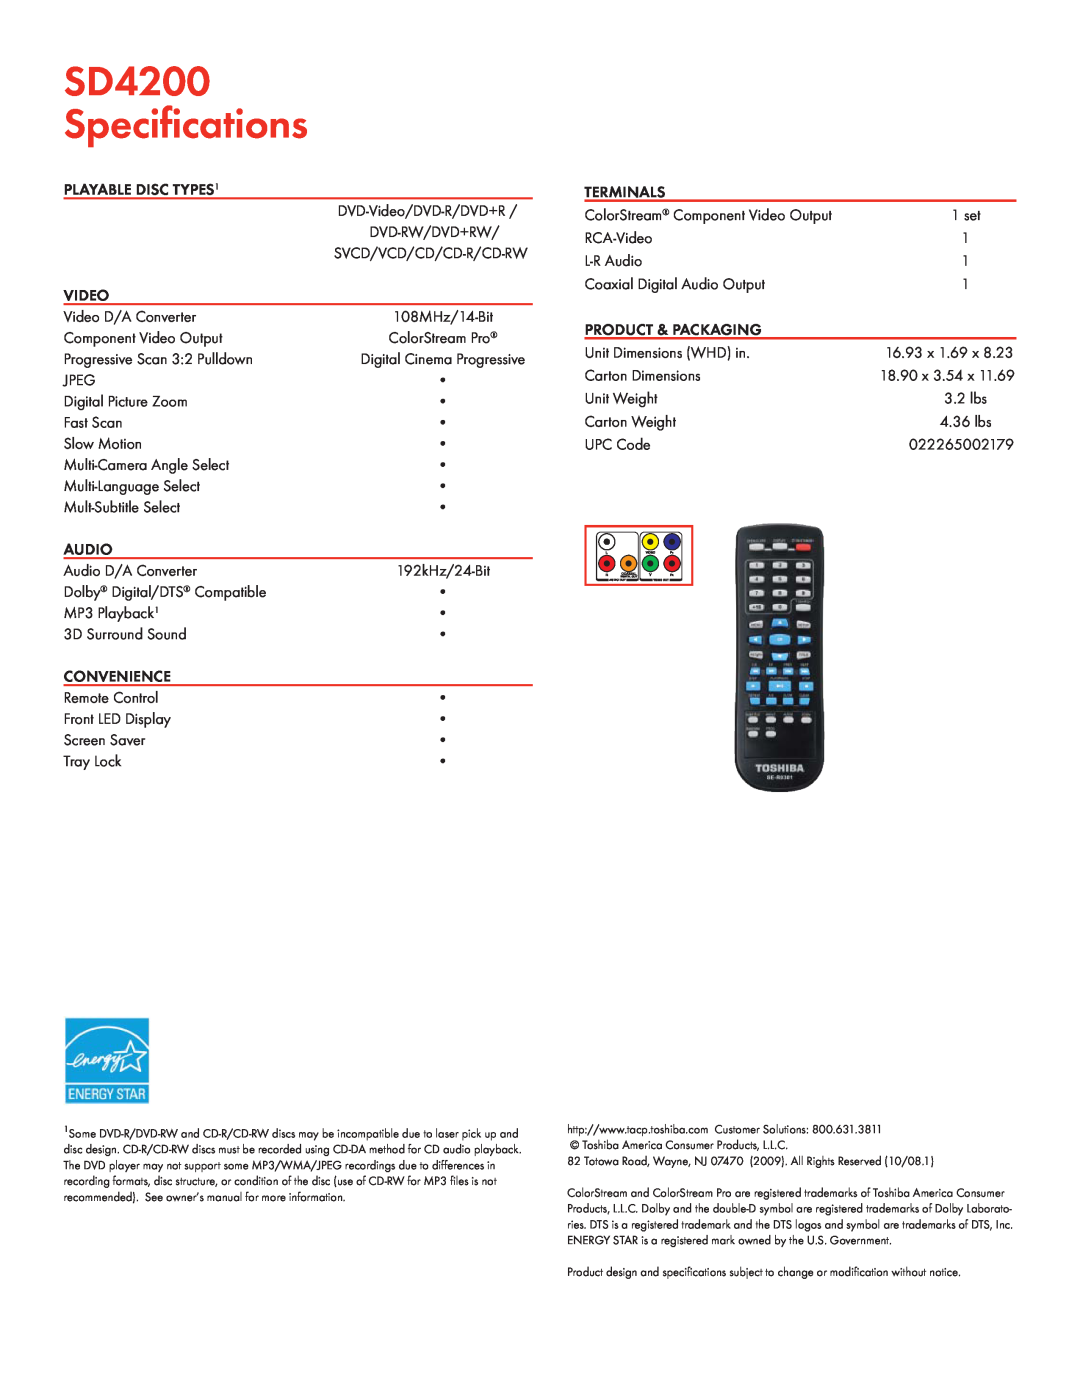 Toshiba manual SD4200 Speciﬁcations, PLAYABLE DISC TYPES1, Video, Audio, Convenience, Terminals, Product & Packaging 